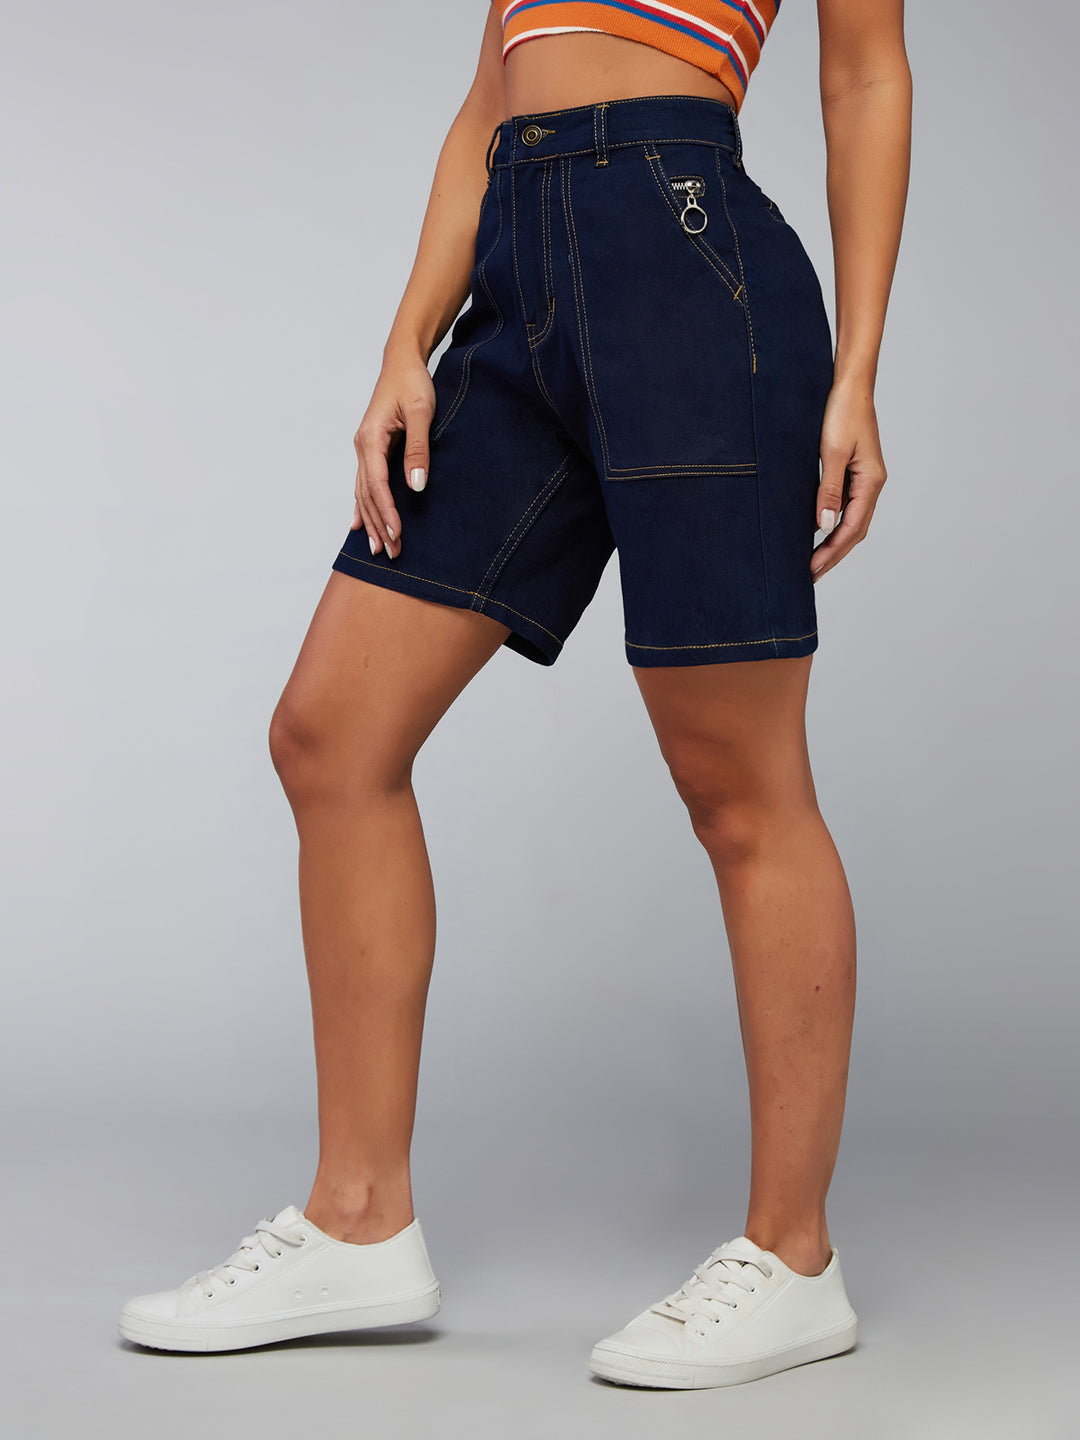 Women's Navy Blue Regular High rise Clean look Above Knee Stretchable Denim Shorts